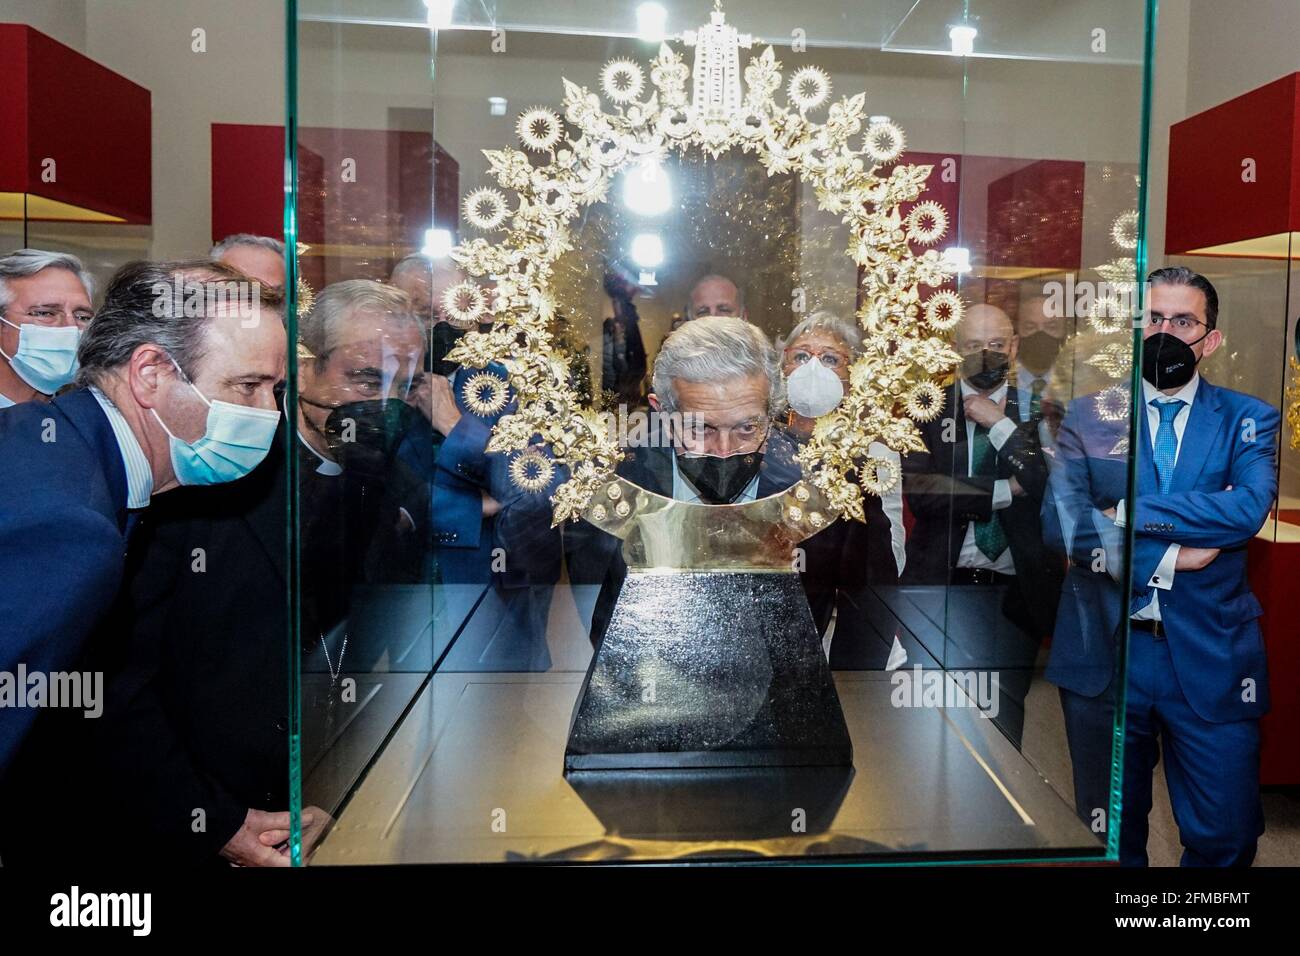 (L to R) President of Agrupacion de Cofradias de Semana Santa de Malaga, Pablo Atencia; Malaga Bishop, Jesus Catala Ibañez; and President of Fundacion Unicaja Braulio Medel observe an exposed crown property of Congregacion de Mena during the exhibition at Centro Cultural Fundacion Unicaja.'Un siglo de esplendor' is an exhibition that shows the artistic heritage of the Holy Week brotherhoods of Malaga and is one of the events organized by Agrupacion de Cofradias de Semana Santa de Malaga for the centenary of the institution. Stock Photo